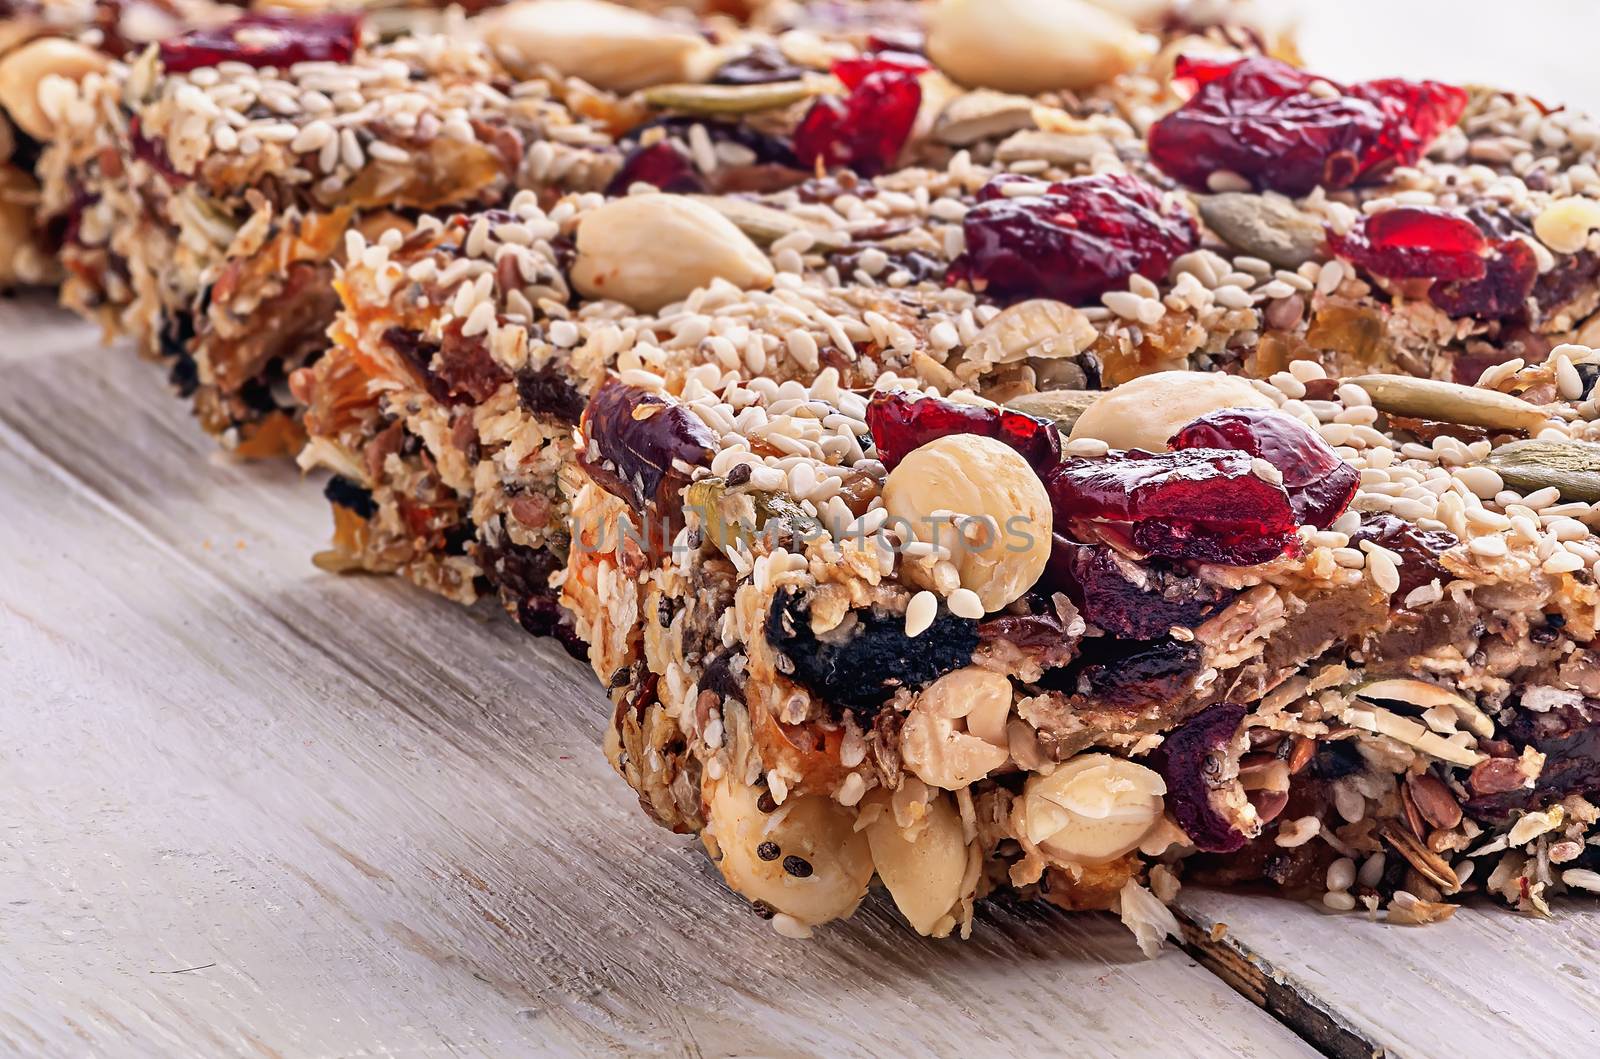 Granola bar. Healthy sweet dessert snack. Cereal granola bar with nuts, fruit and berries on a white wooden table. Closeup.